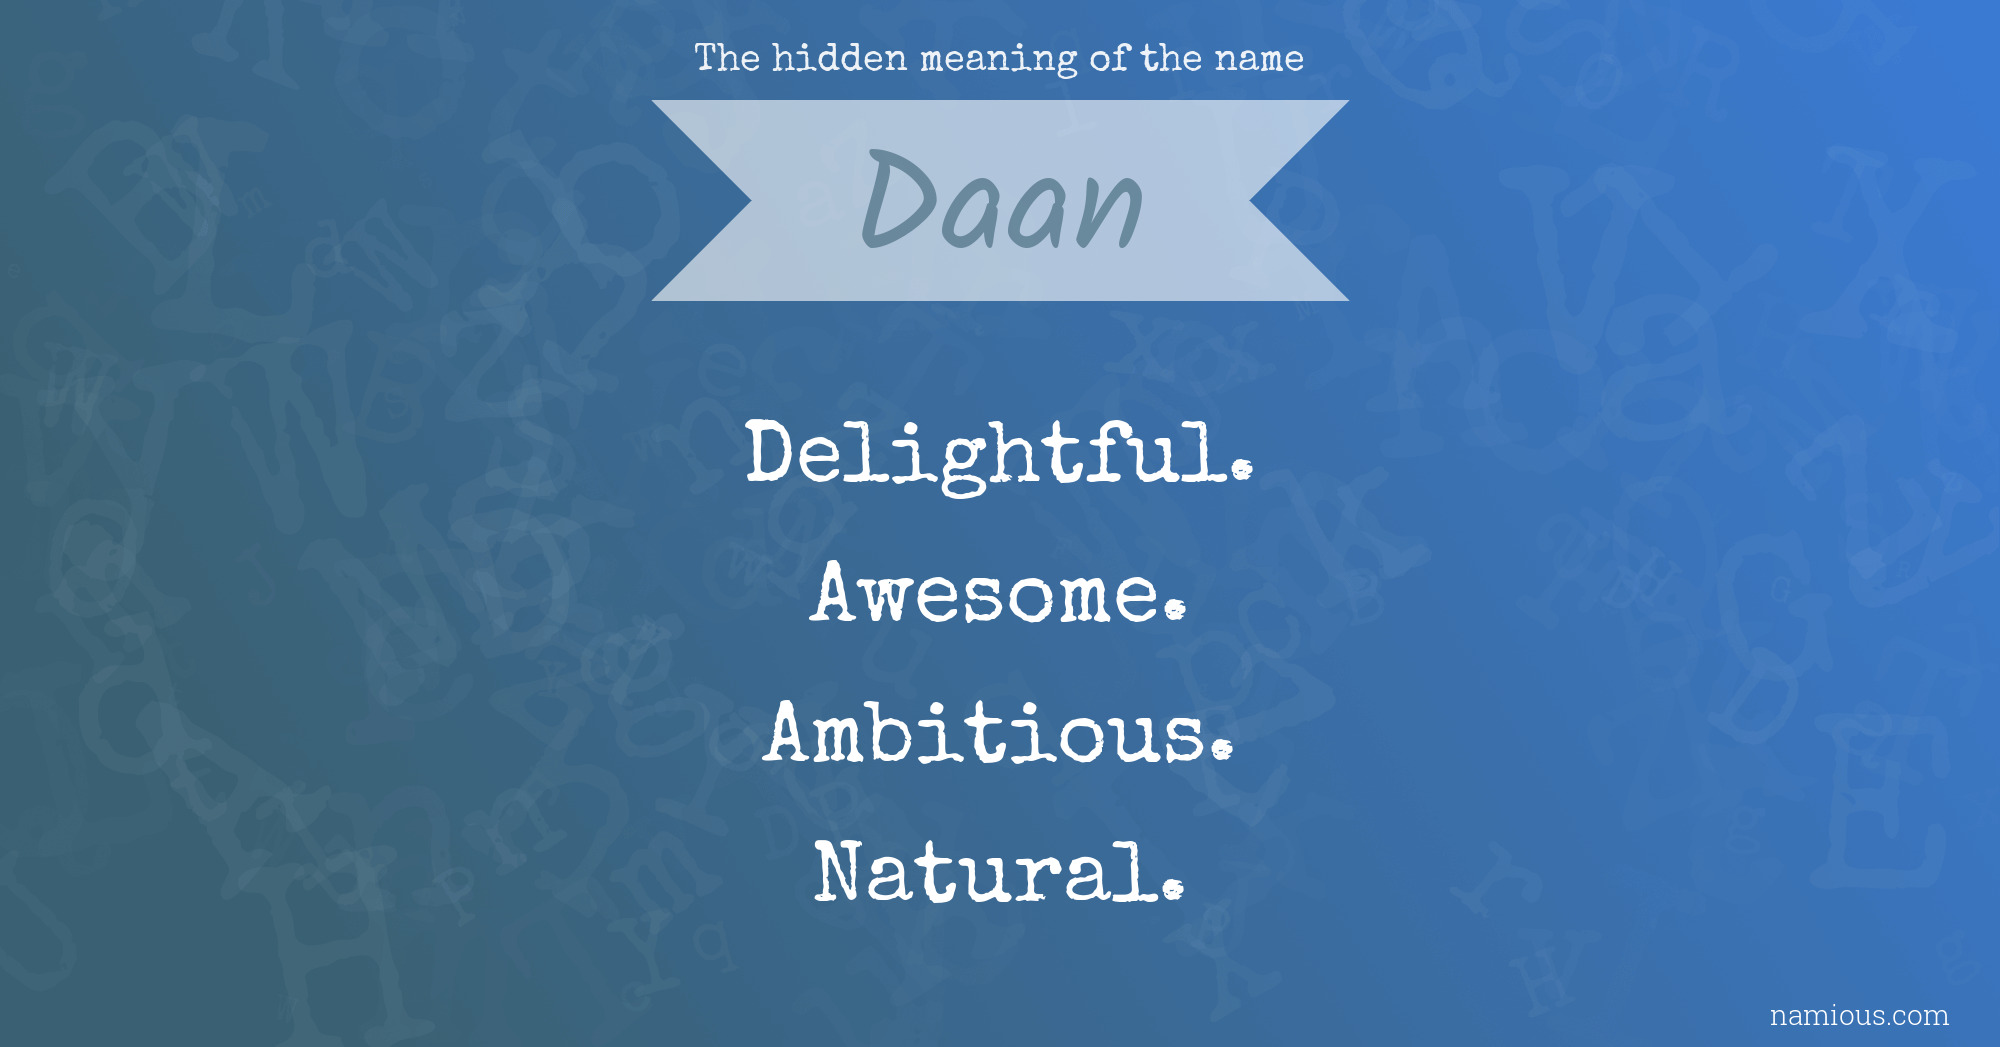 The hidden meaning of the name Daan